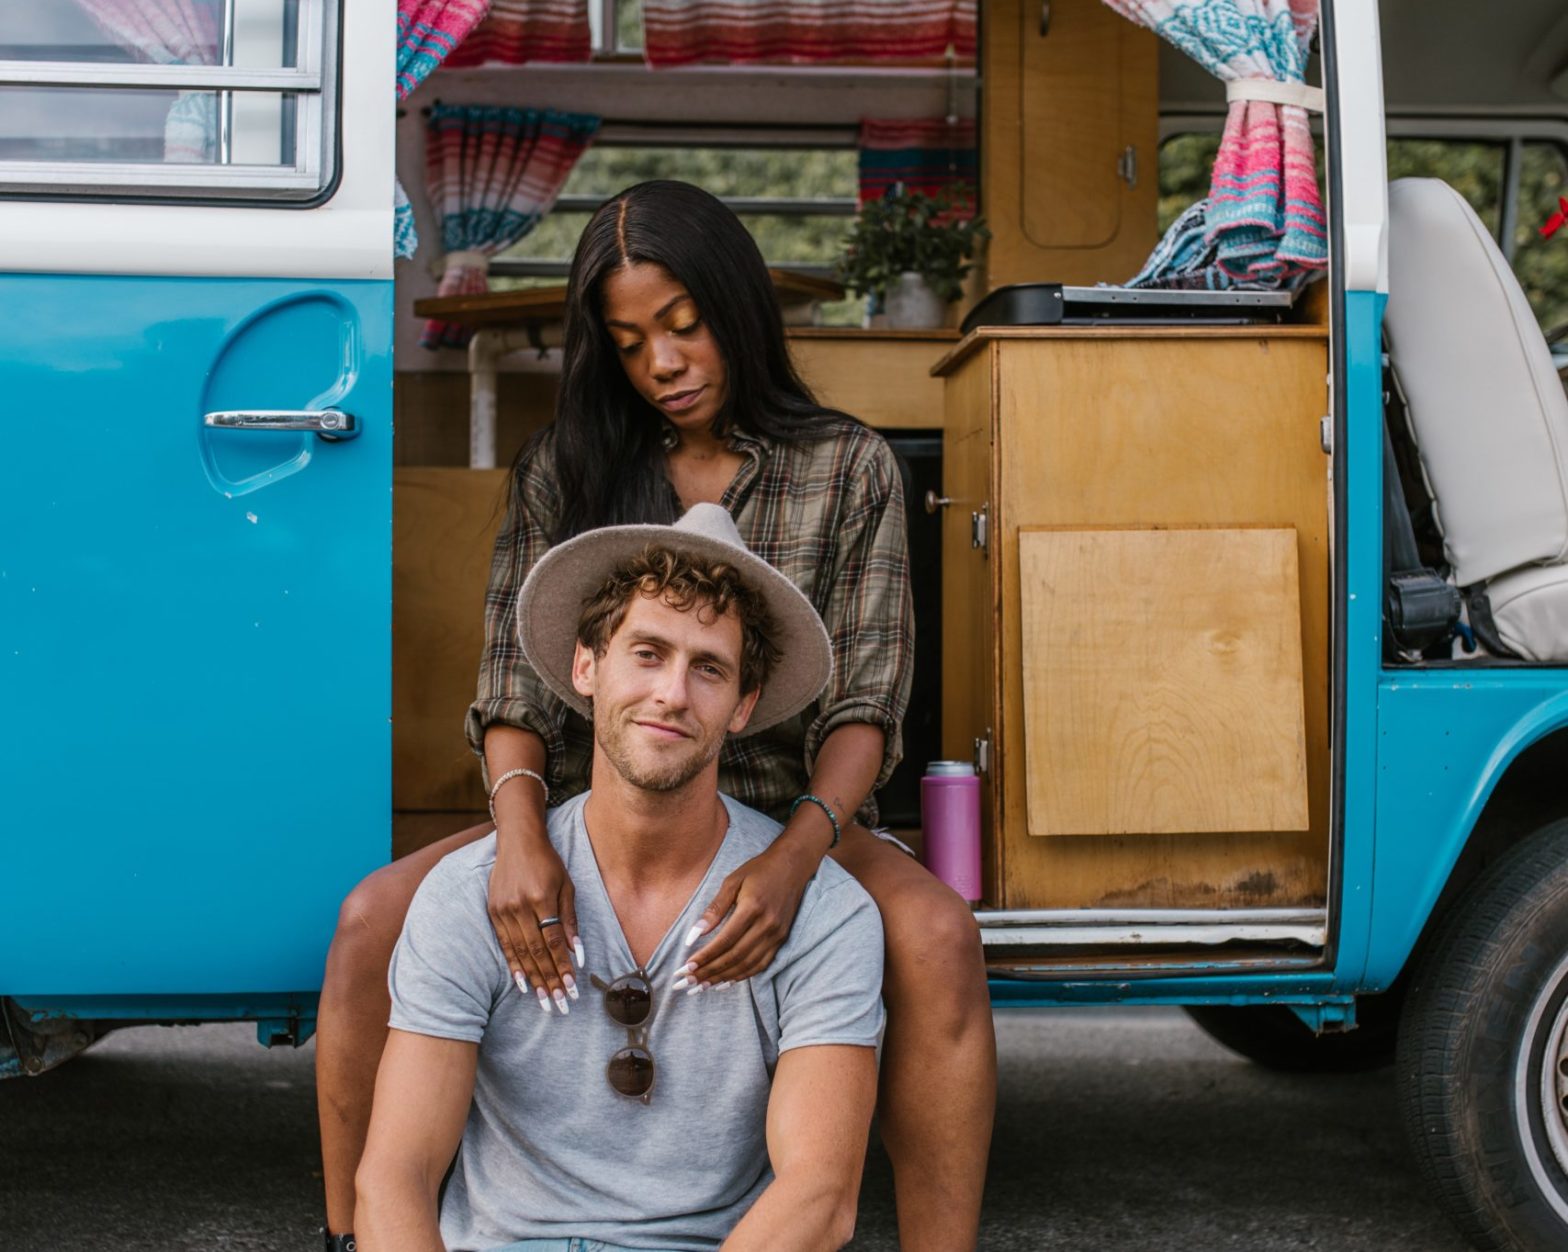 This Black Woman Tried Van Life And Says It's Just "Glorified Homelessness"